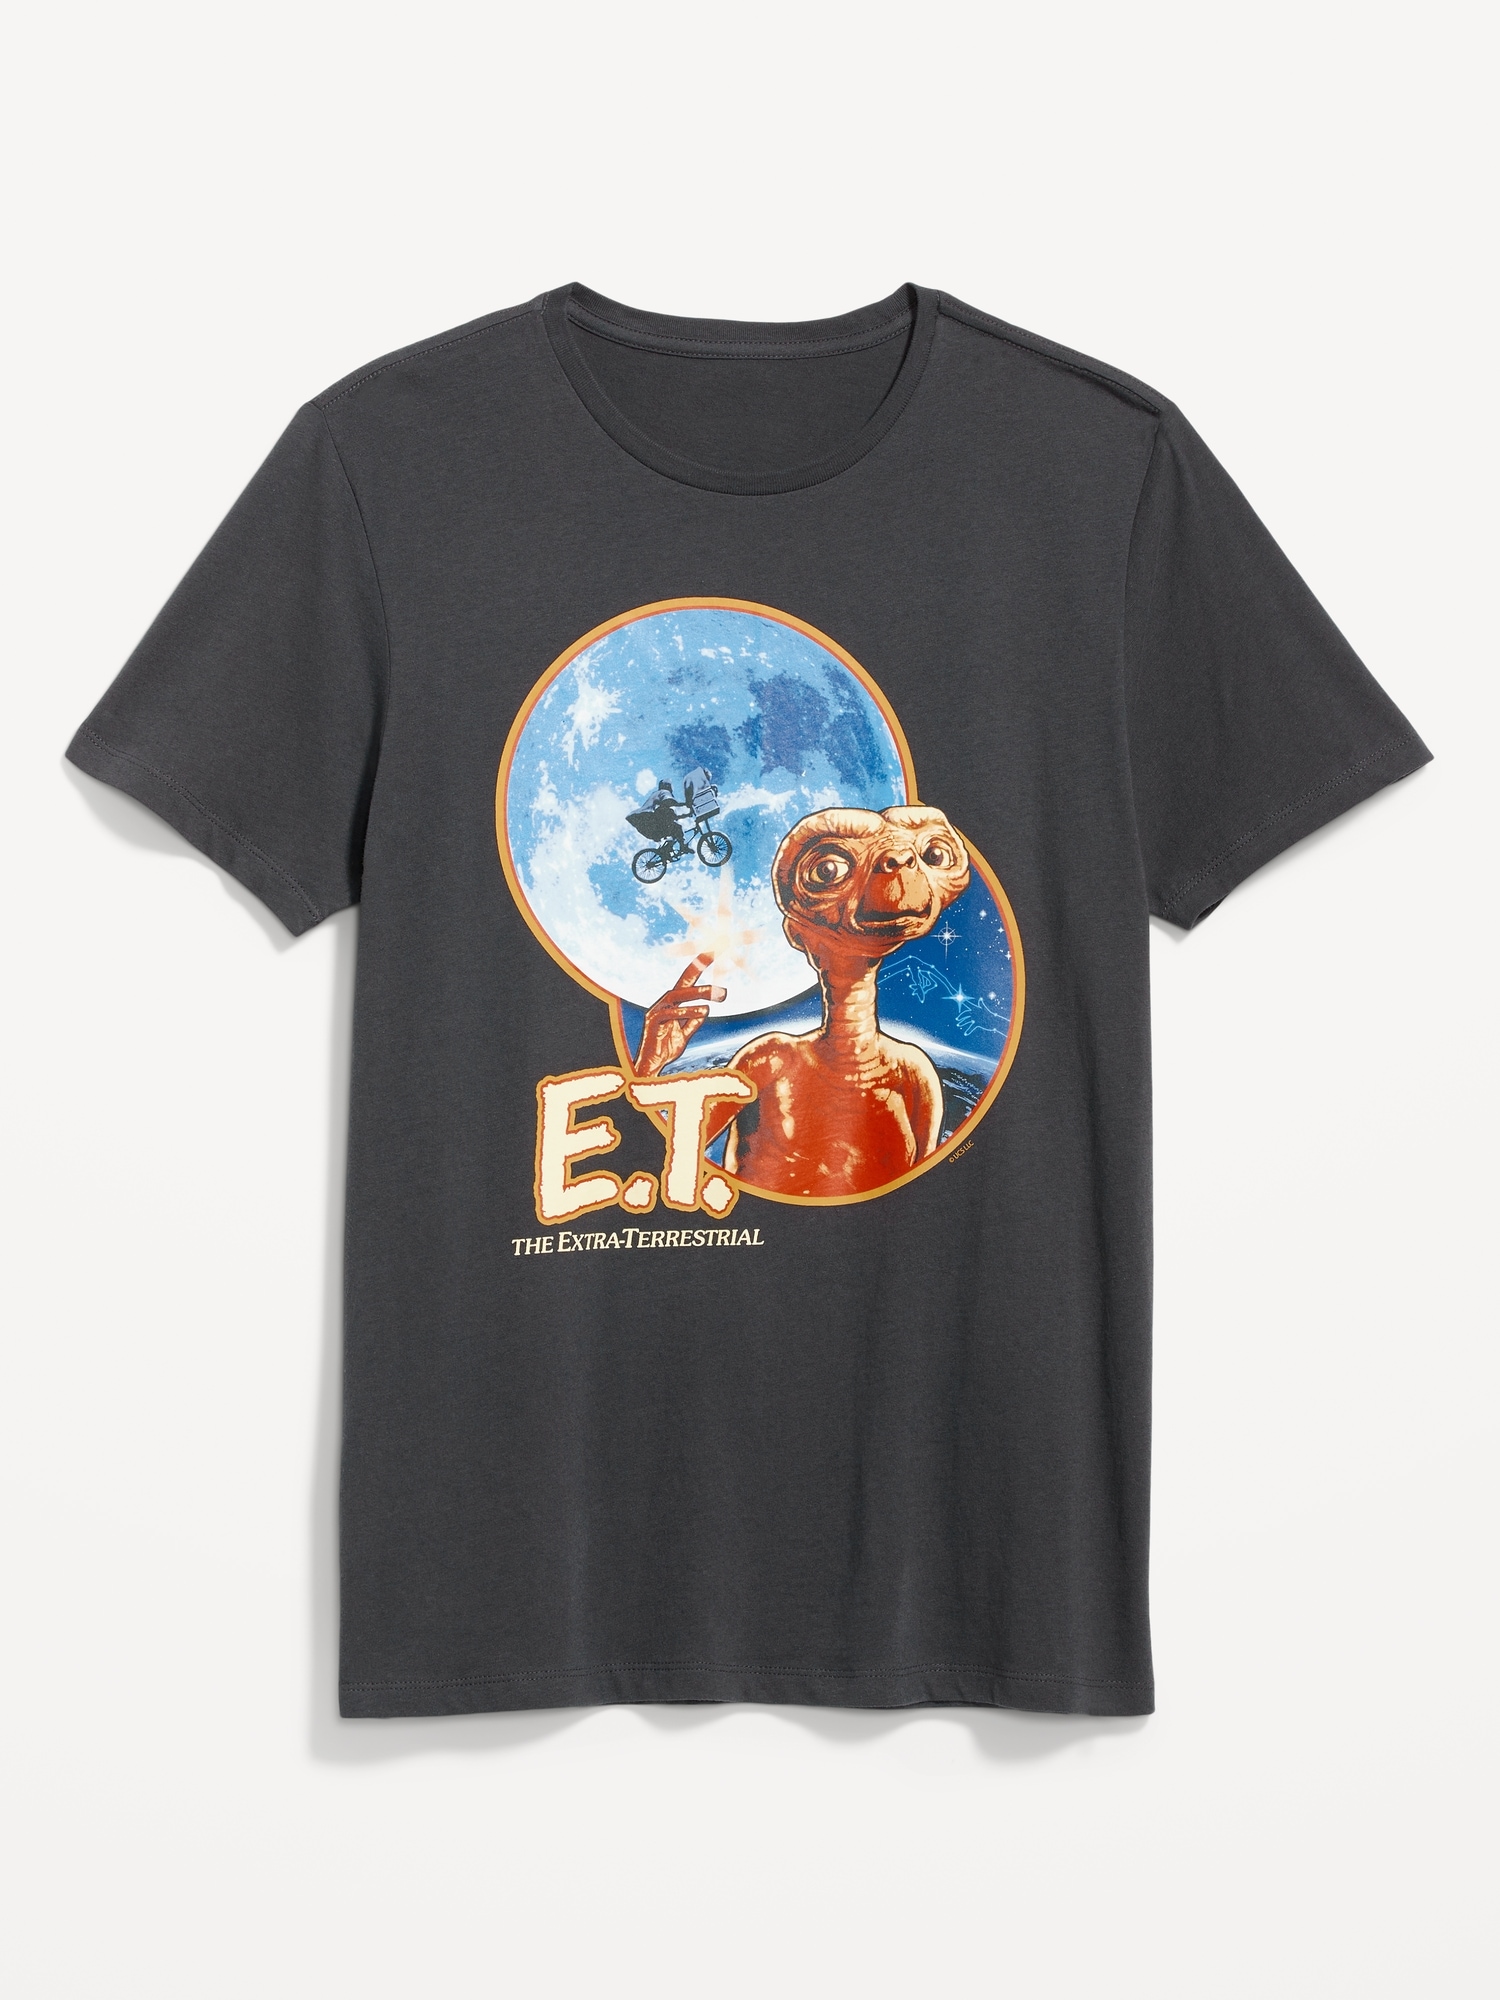 Gender-Neutral E.T. The Extra-Terrestrial T-Shirt for Adults